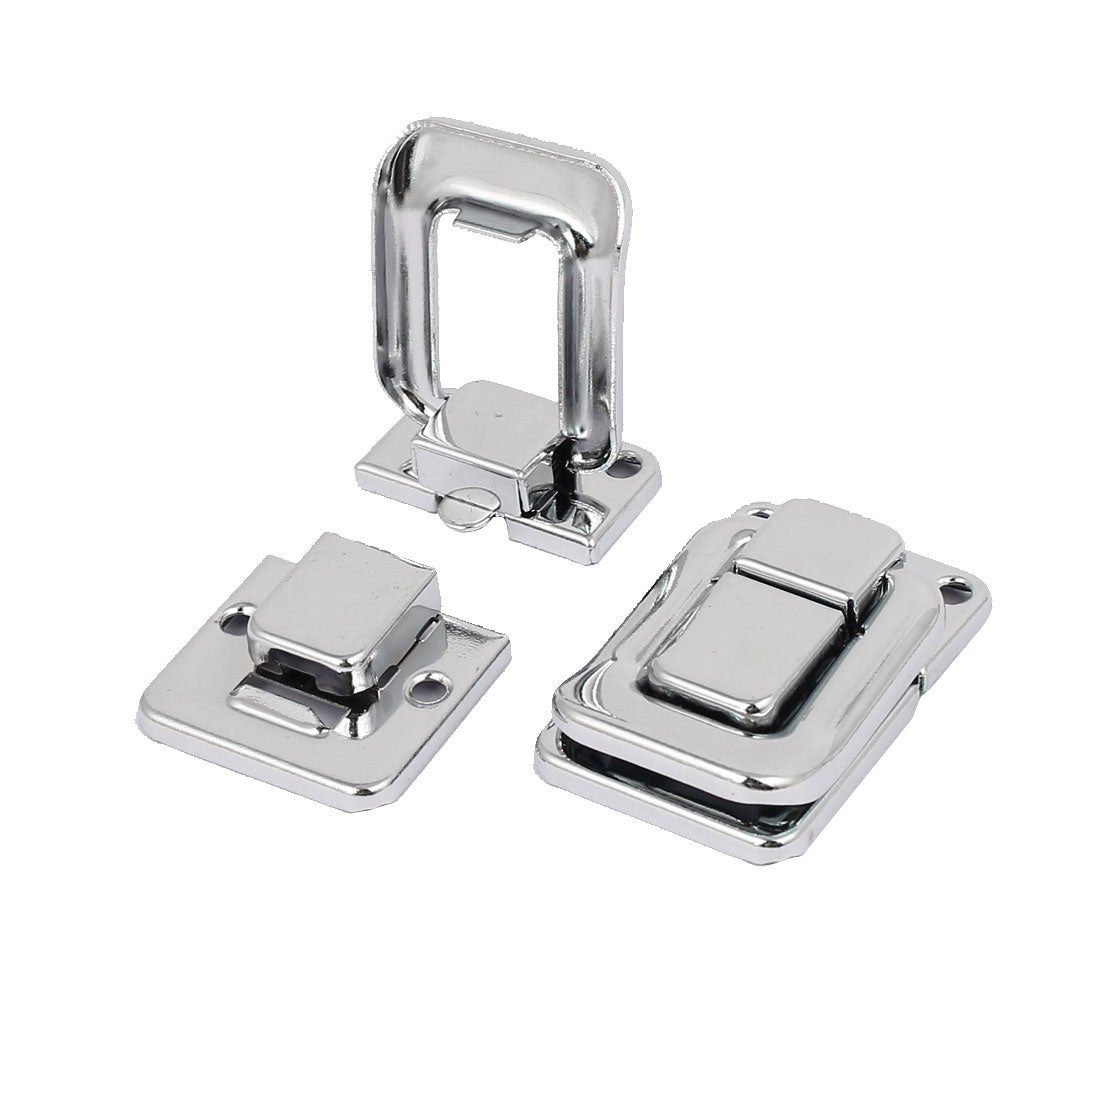 uxcell Uxcell Toolbox Jewelry Box Toggle Latch Catch Hasp Lock Silver Tone 2pcs